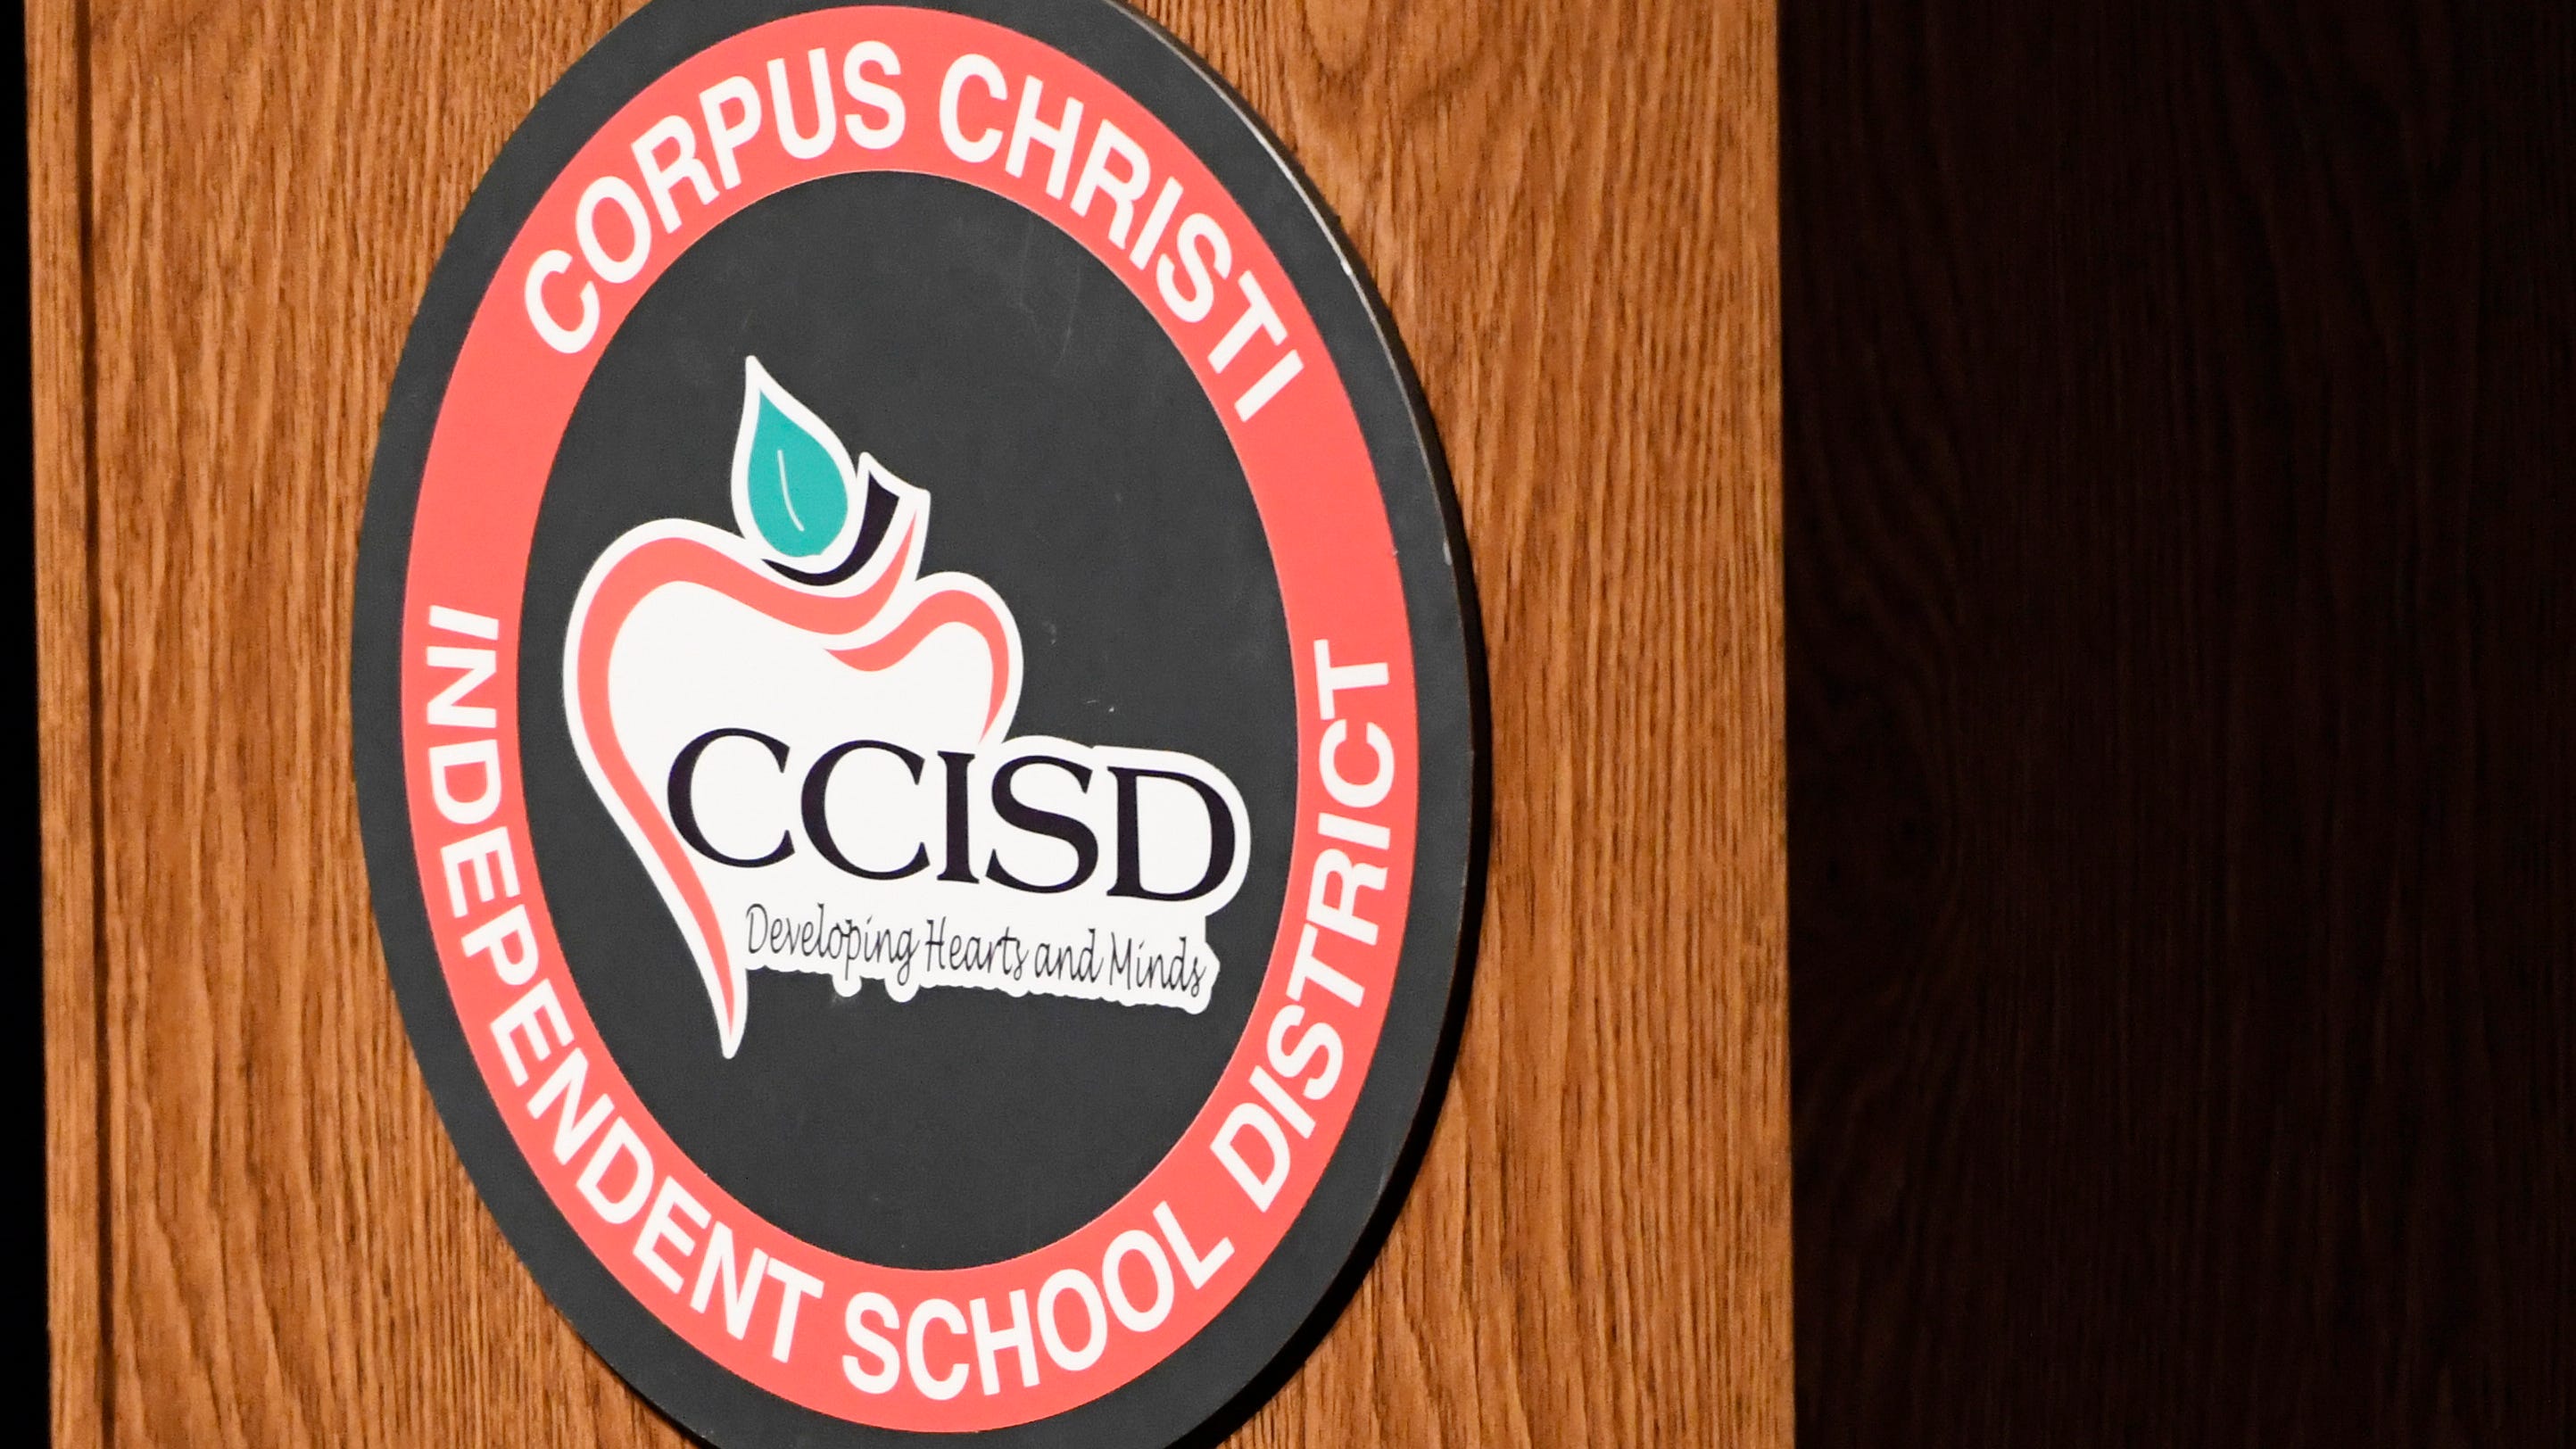 CCISD releases new COVID guidelines ahead of school year